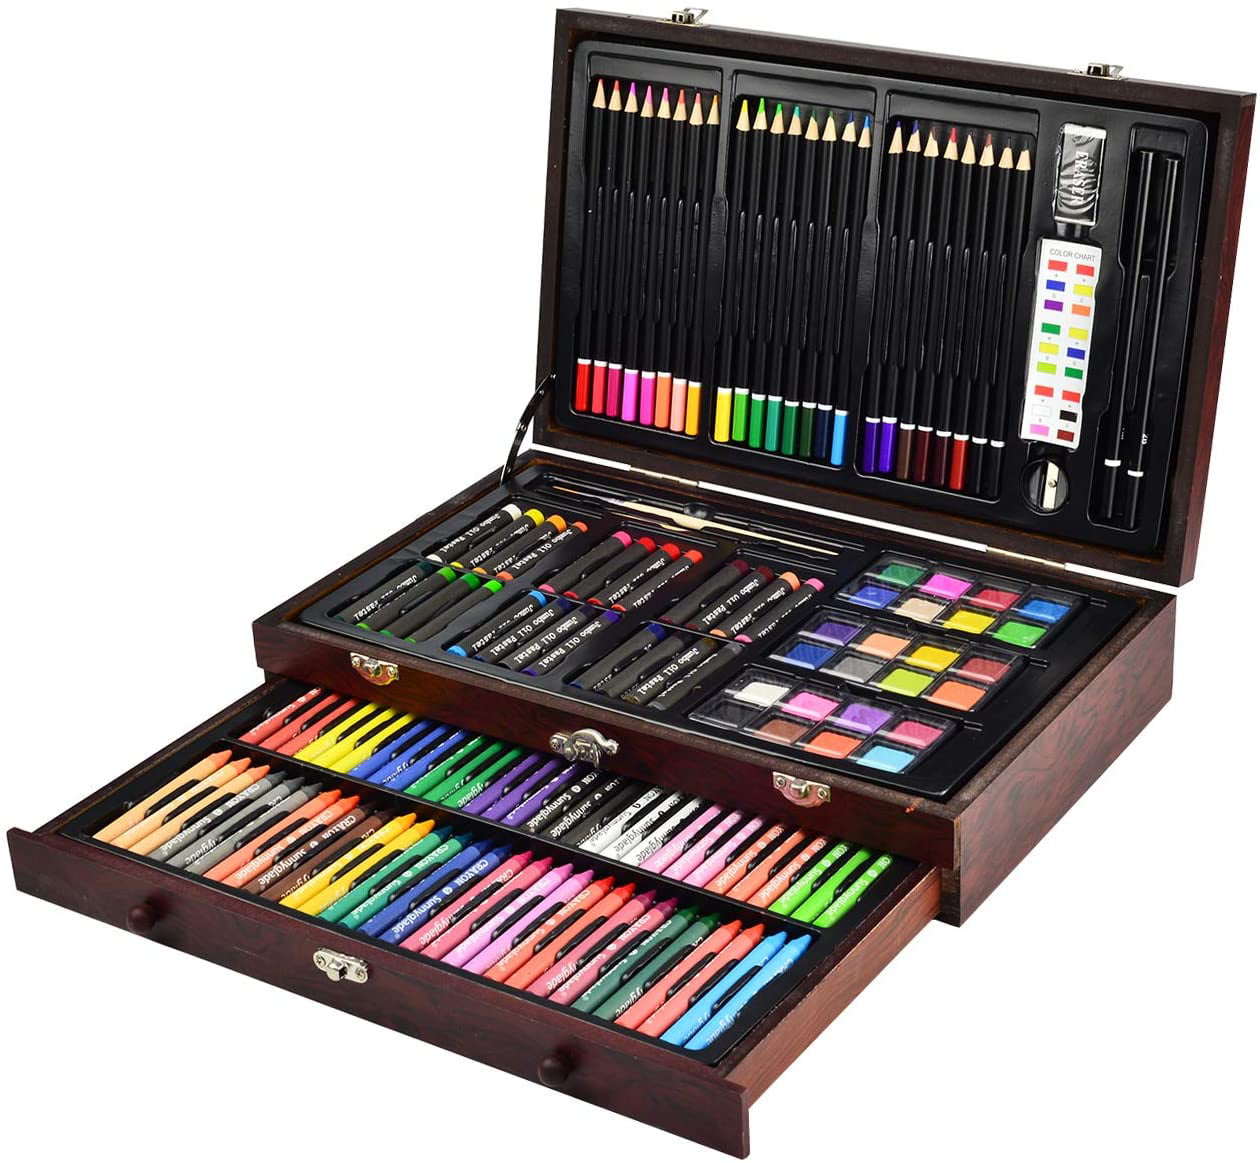 WRITENBACO 145 Piece Deluxe Art Set, Wooden Art Box & Drawing Kit with Oil  Pastels, Crayons, Colored Pencils, Watercolor Cakes, Brushes, Creative Gift